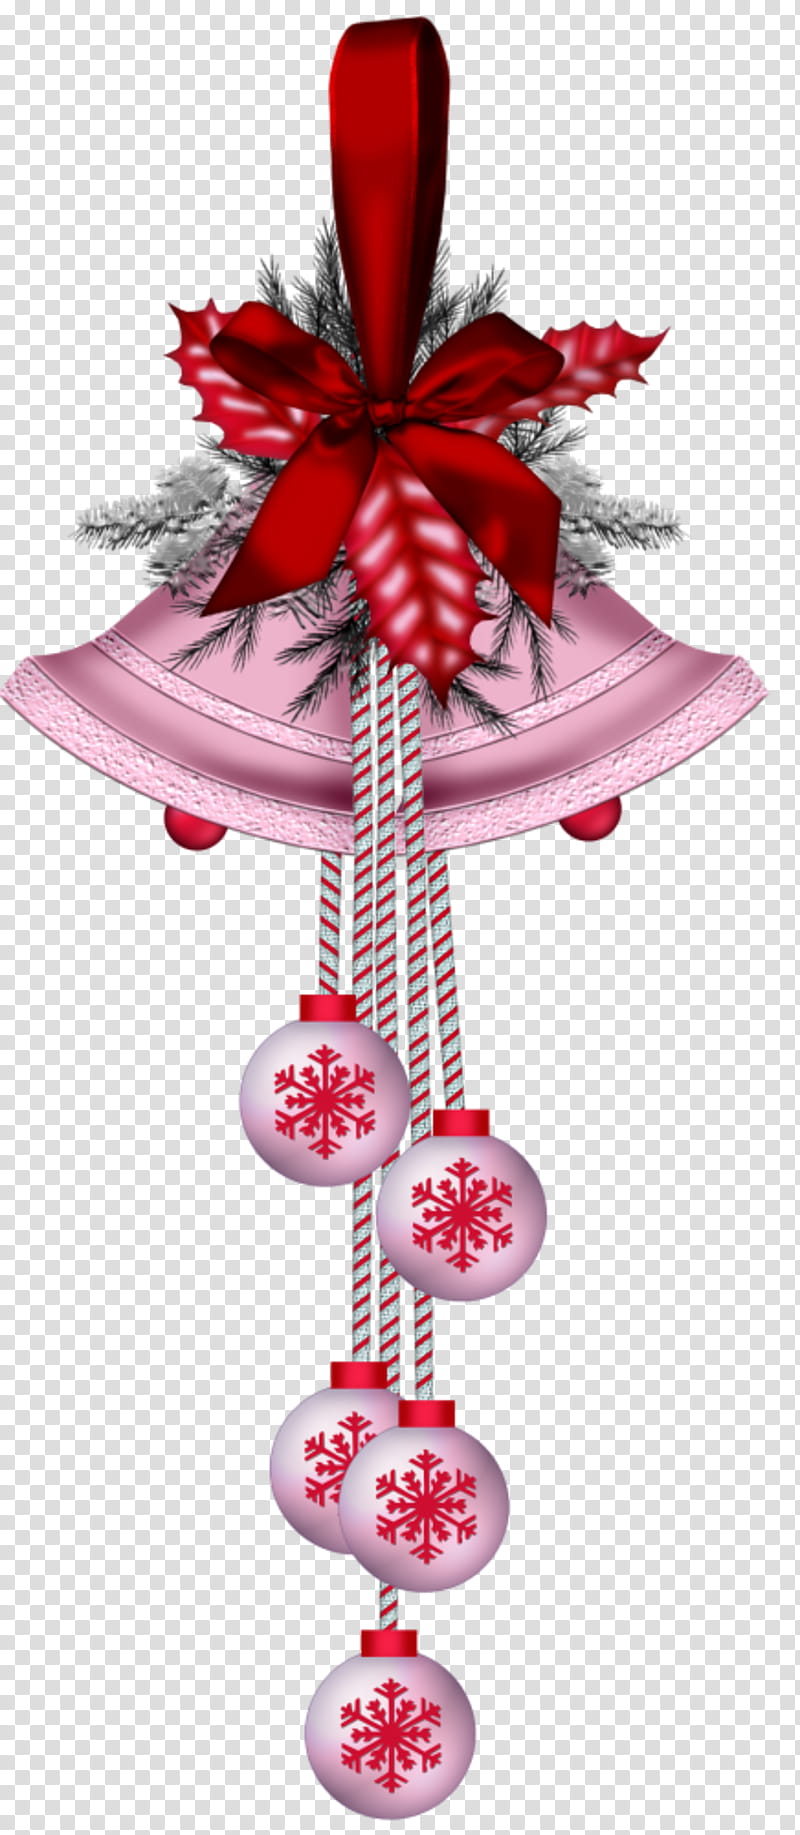 Christmas Bell, Christmas Day, Santa Claus, Christmas Decoration, Jingle Bell, Christmas Ornament, Christmas Card, Christmas And Holiday Season transparent background PNG clipart